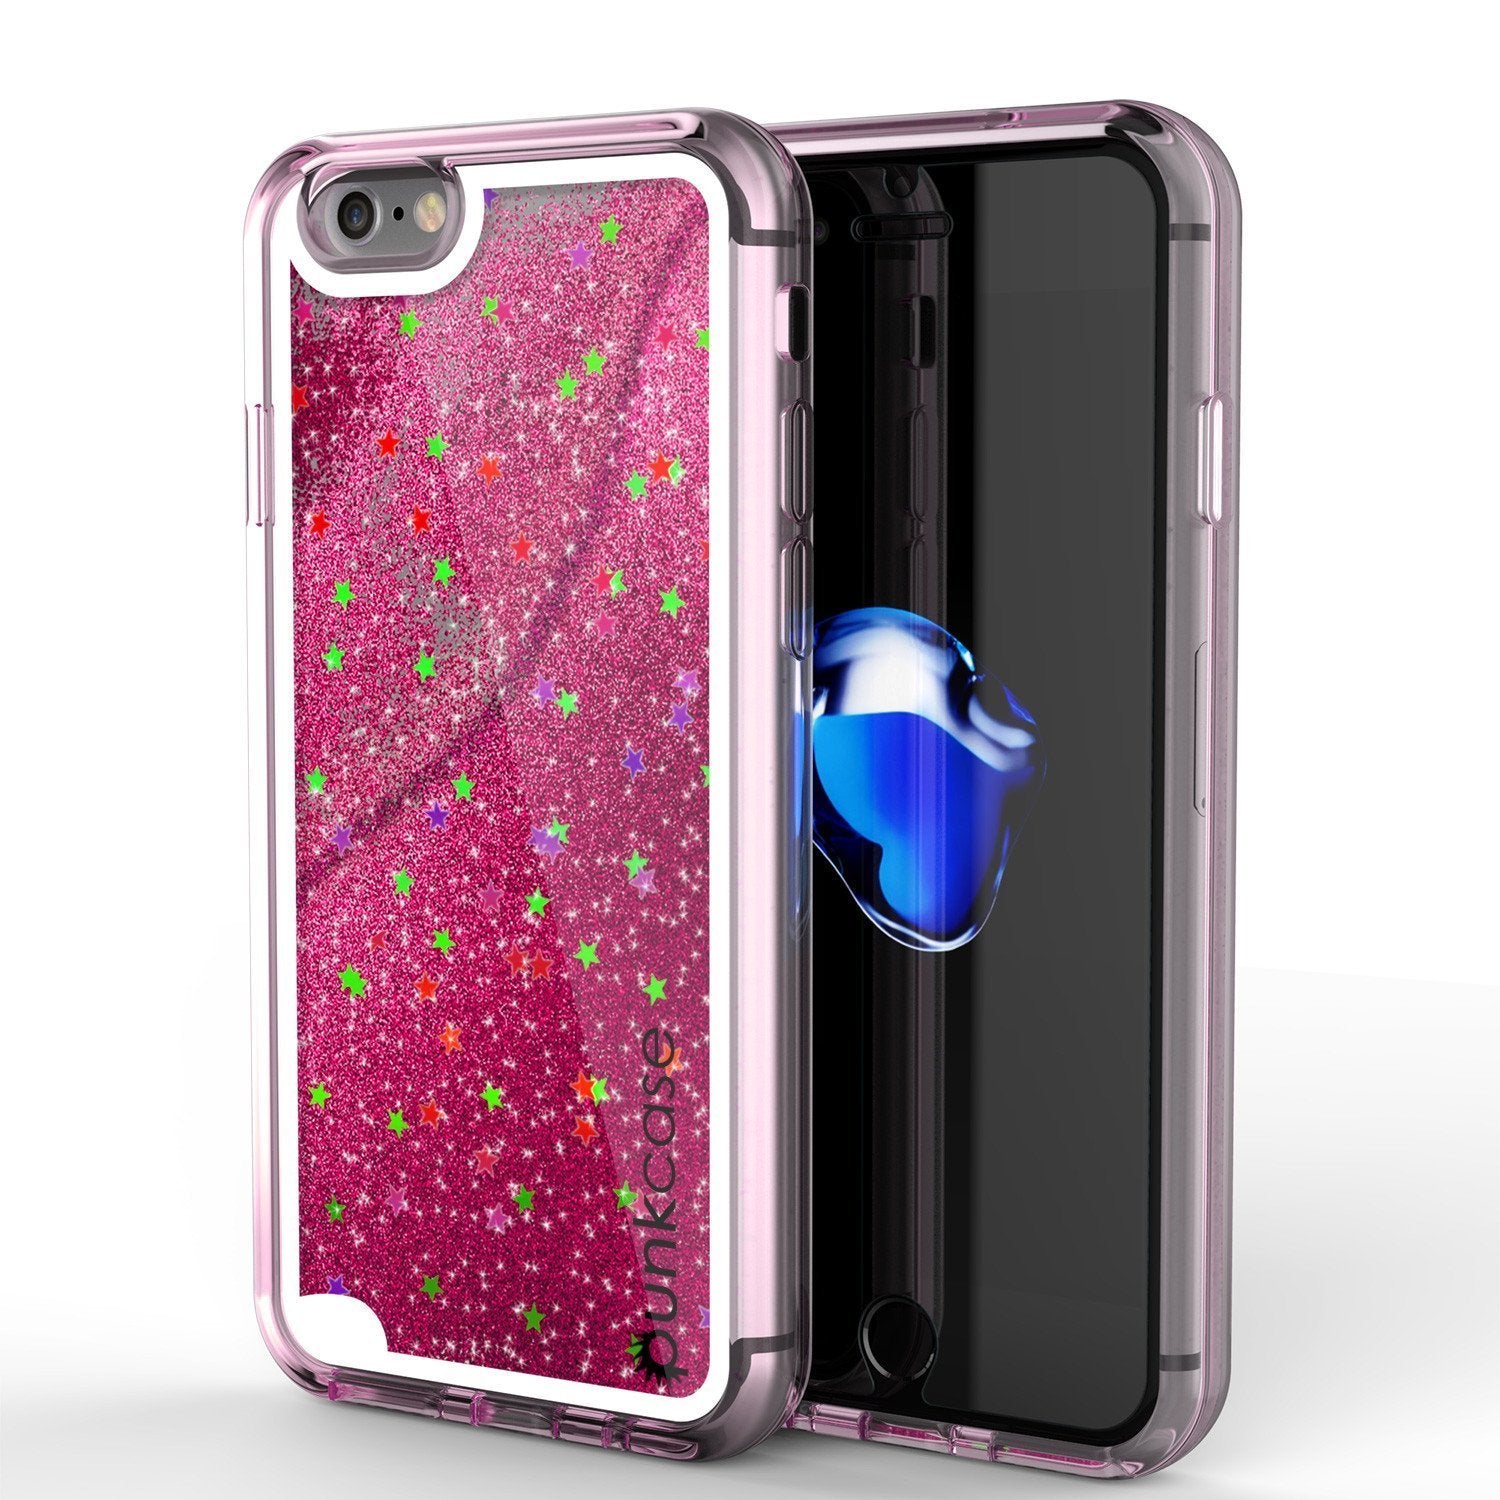 iPhone SE (4.7") Case, PunkCase LIQUID Pink Series, Protective Dual Layer Floating Glitter Cover